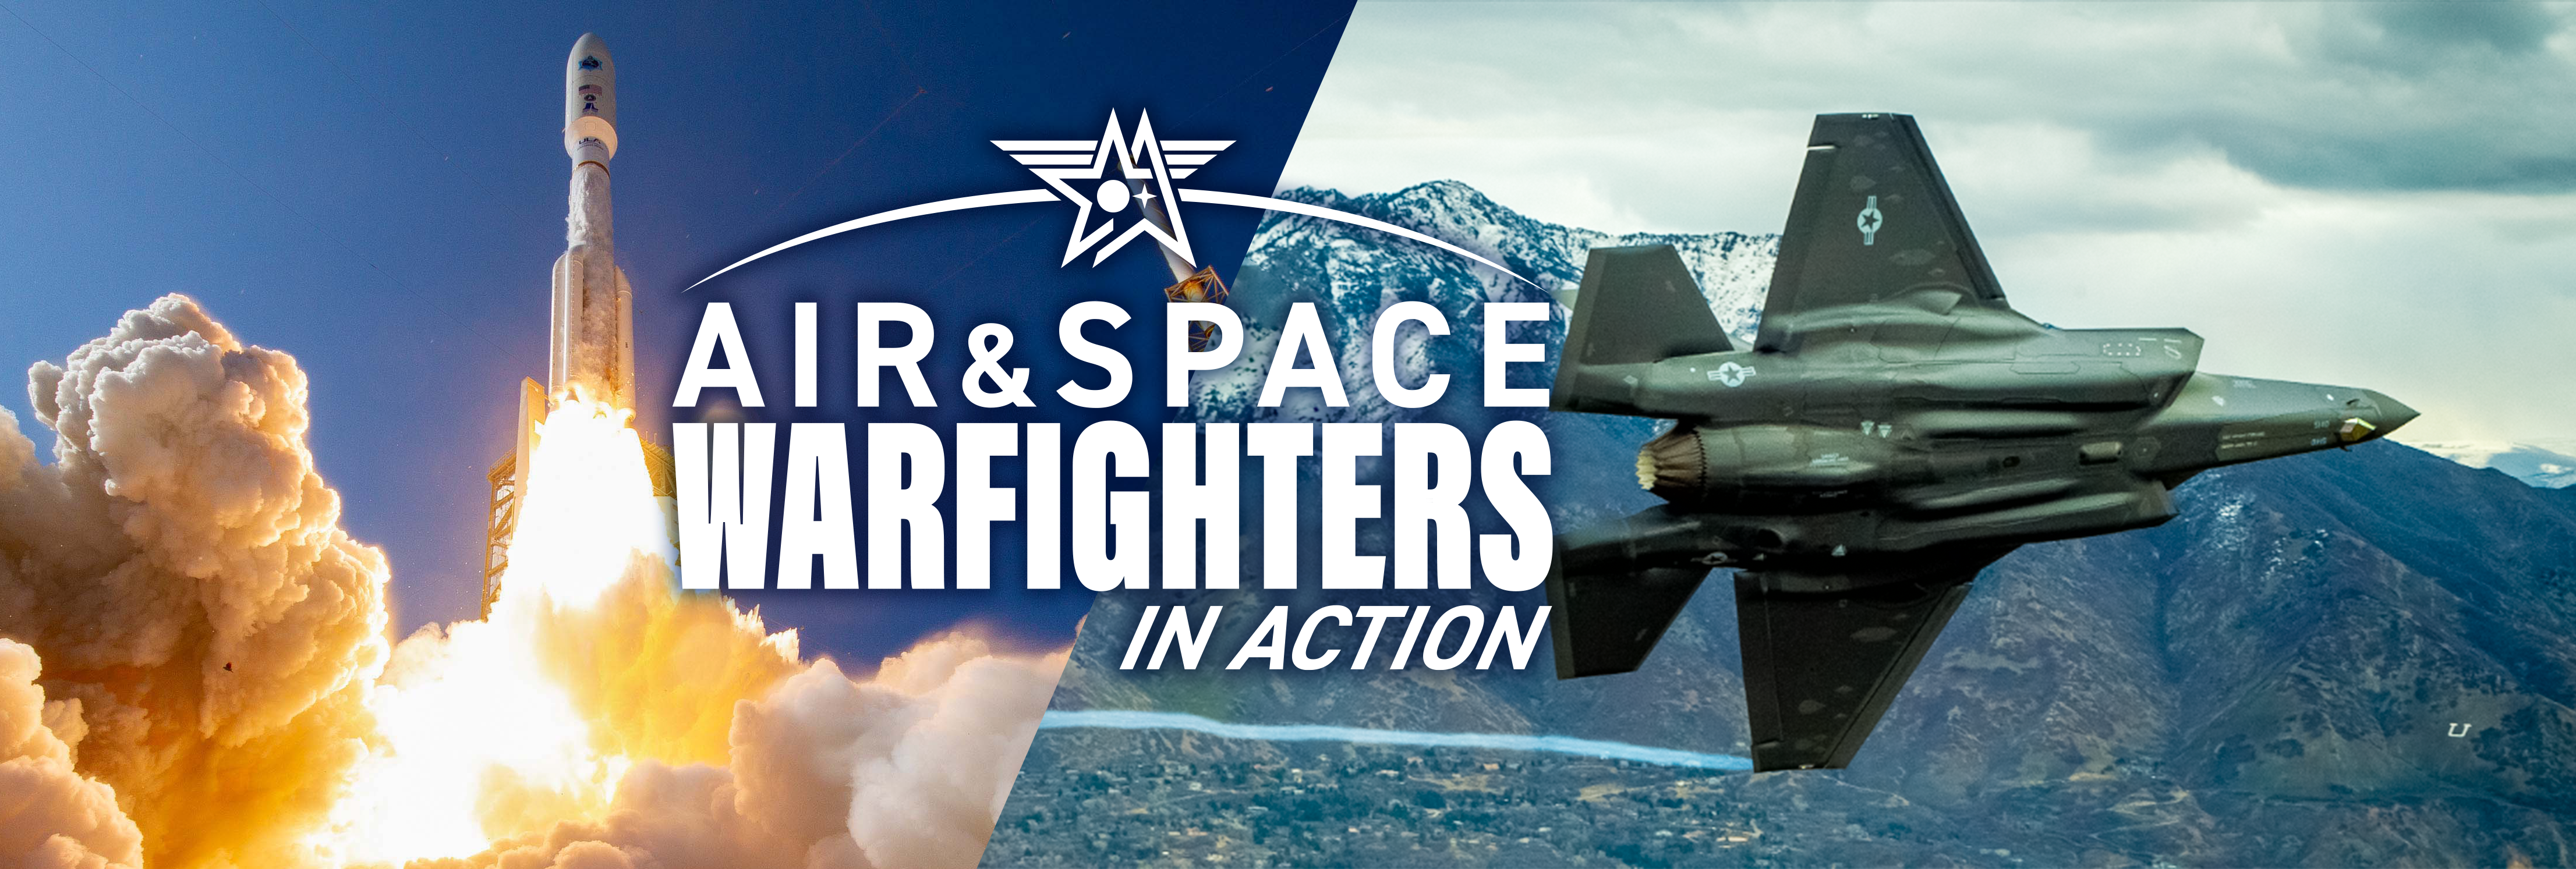 Air & Space Warfighters in Action